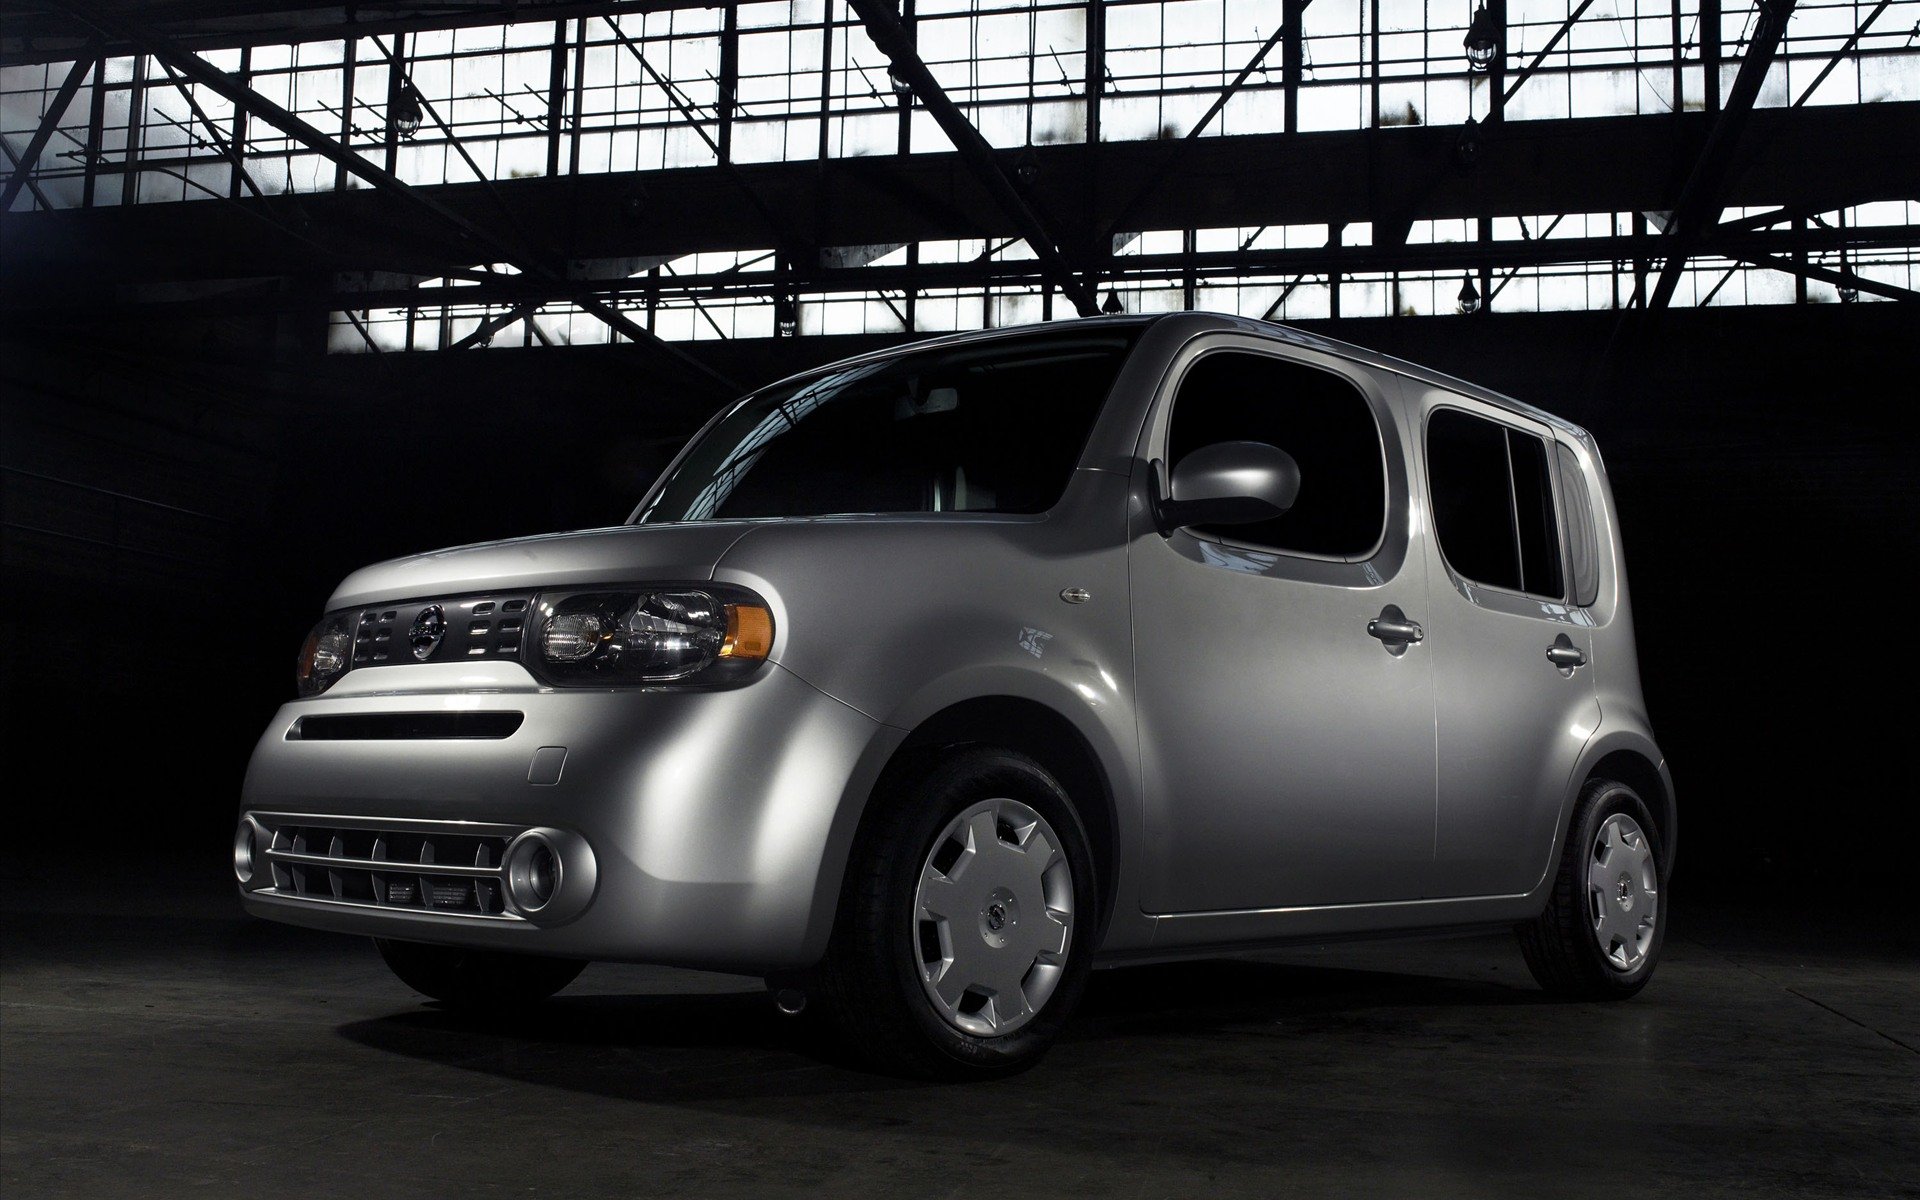 Nissan cube wallpapers hd desktop and mobile backgrounds